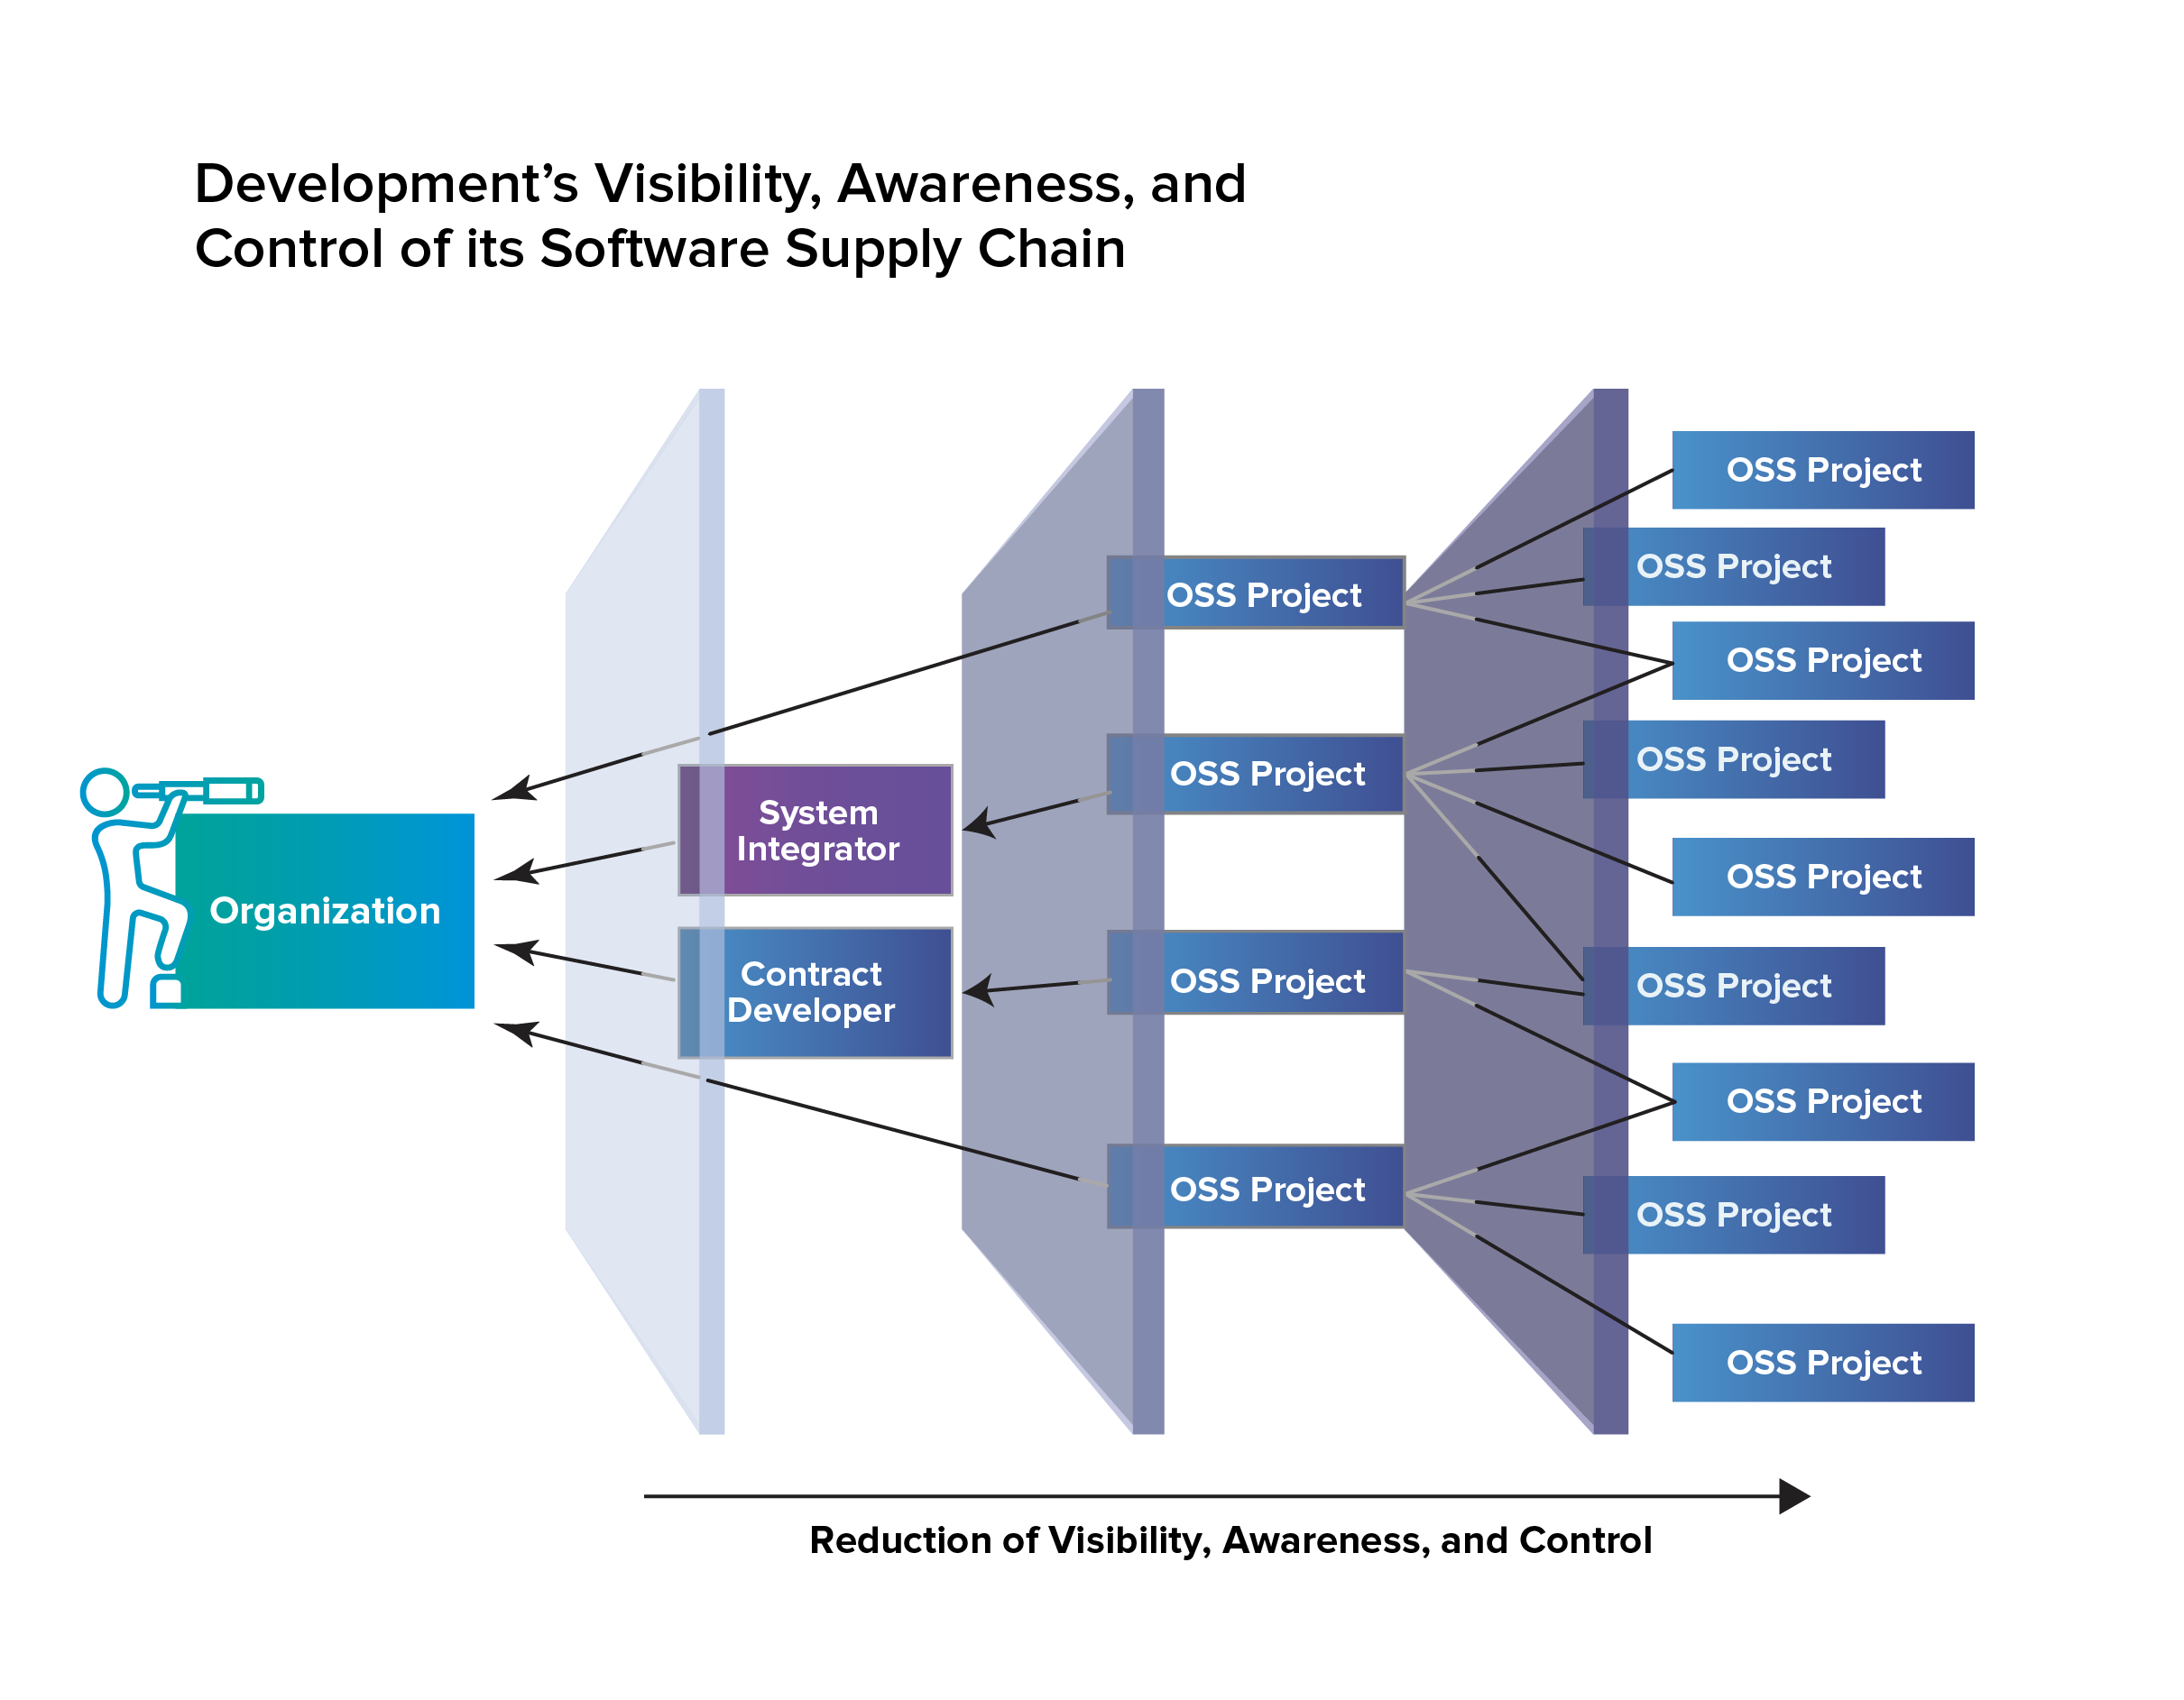 FIGURE 5A Organizational Visibility of Supply Chain@4x